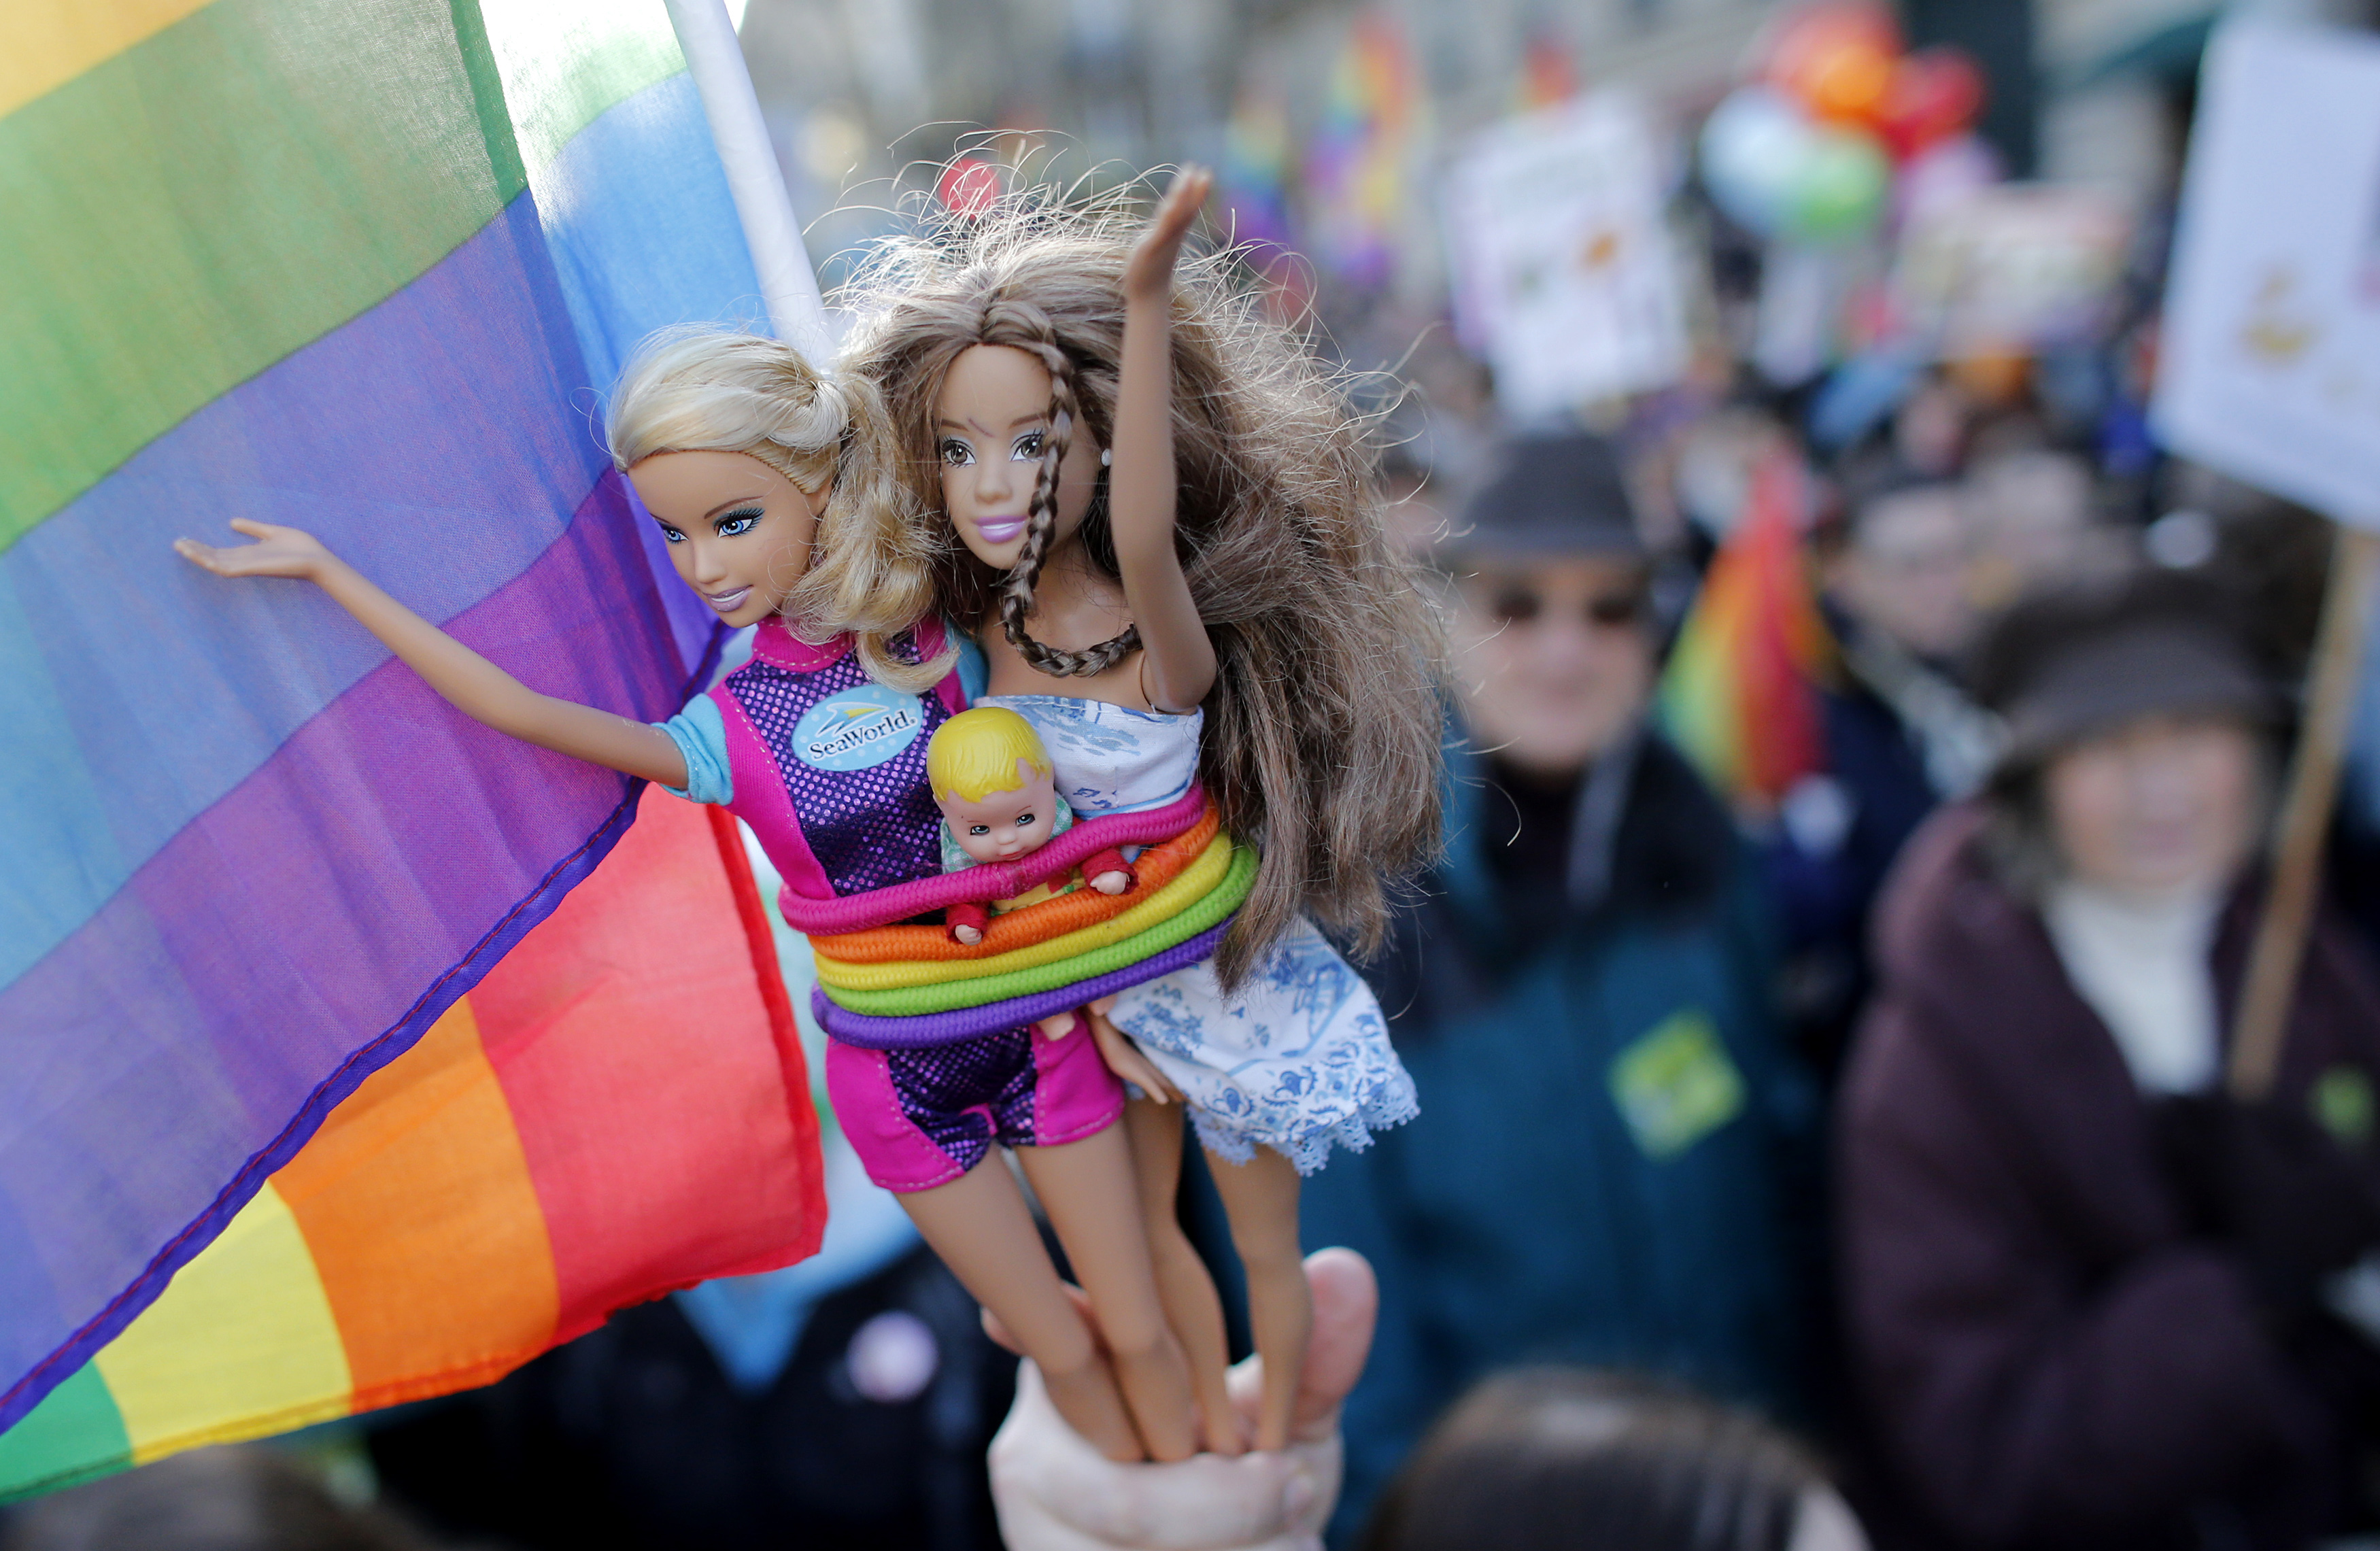 A demonstrator holds Barbie dolls as people march through the streets of Paris in support of the French government's draft law to legalise marriage and adoption for same-sex couples